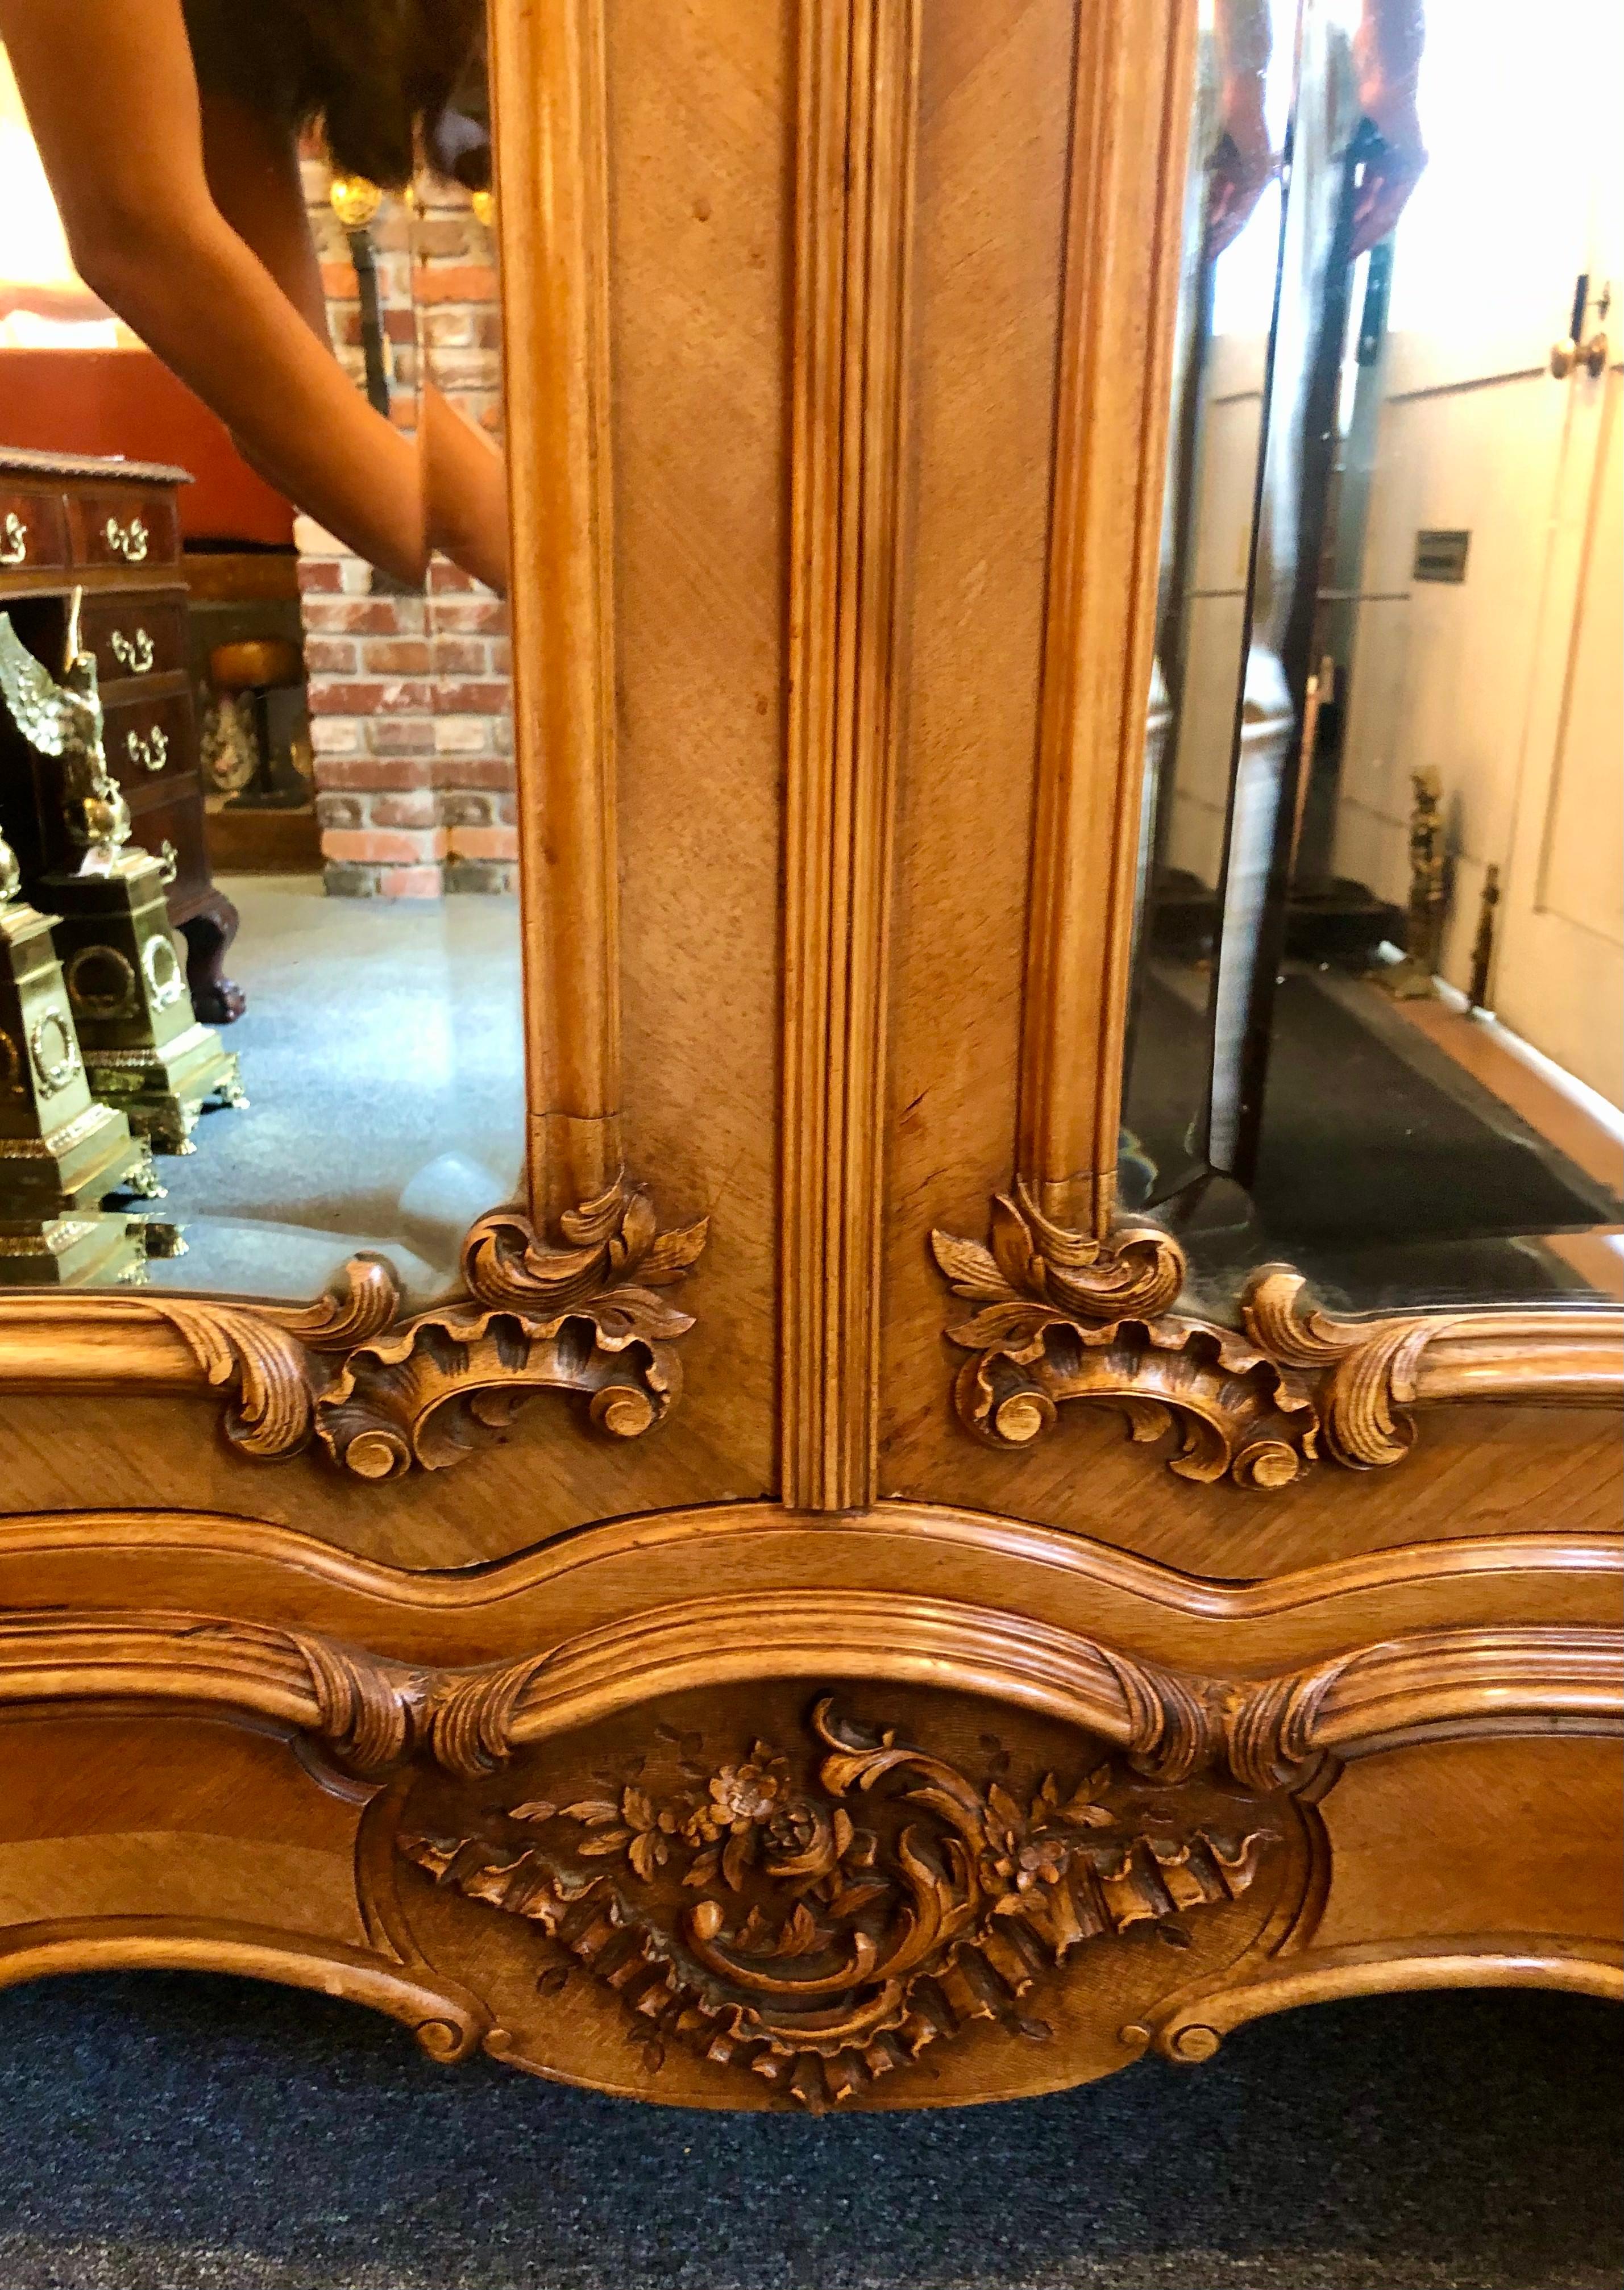 Late 19th Century Antique French Louis XV Carved Walnut Beveled Mirror 2 Door Armoire, Circa 1880